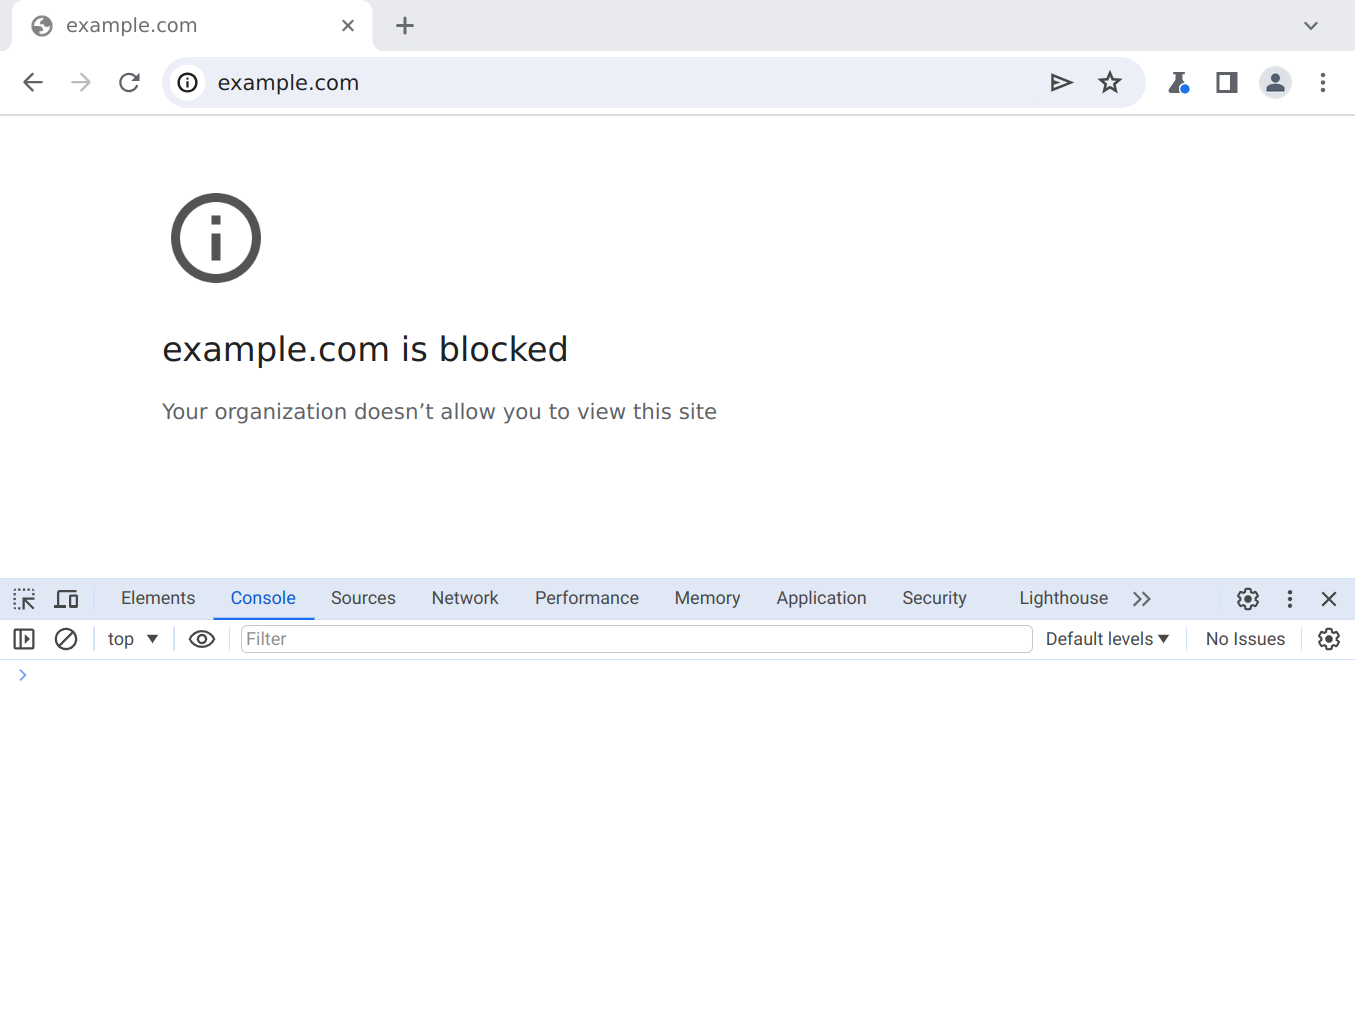 A screenshot of a web browser showing that after we try to redirect the page away, access to example.com is blocked